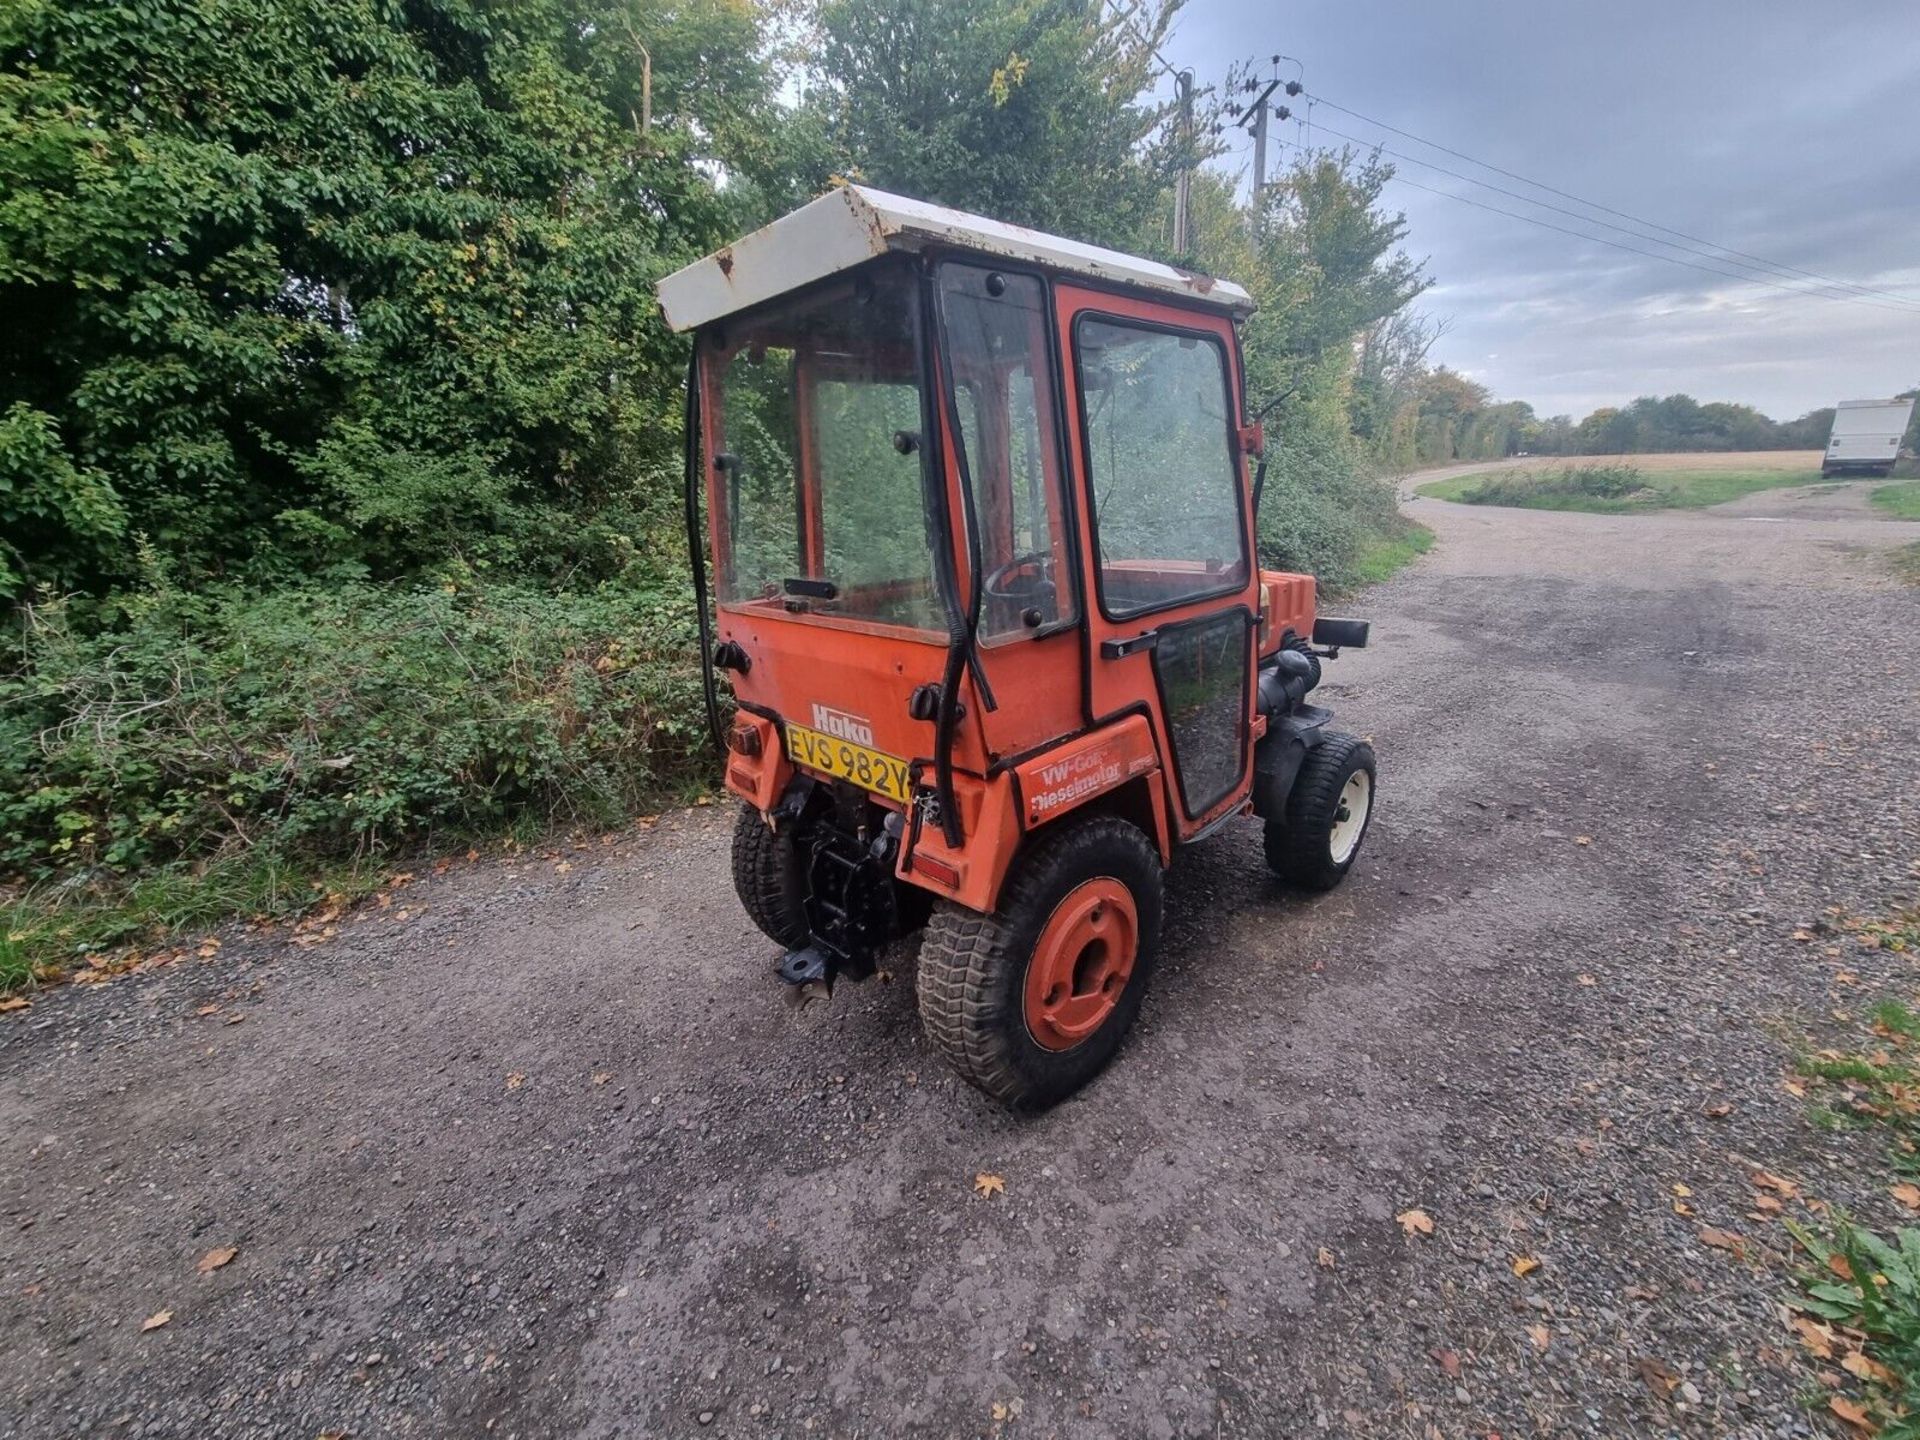 1987 HAKO TRACTOR 2WD - Image 5 of 6